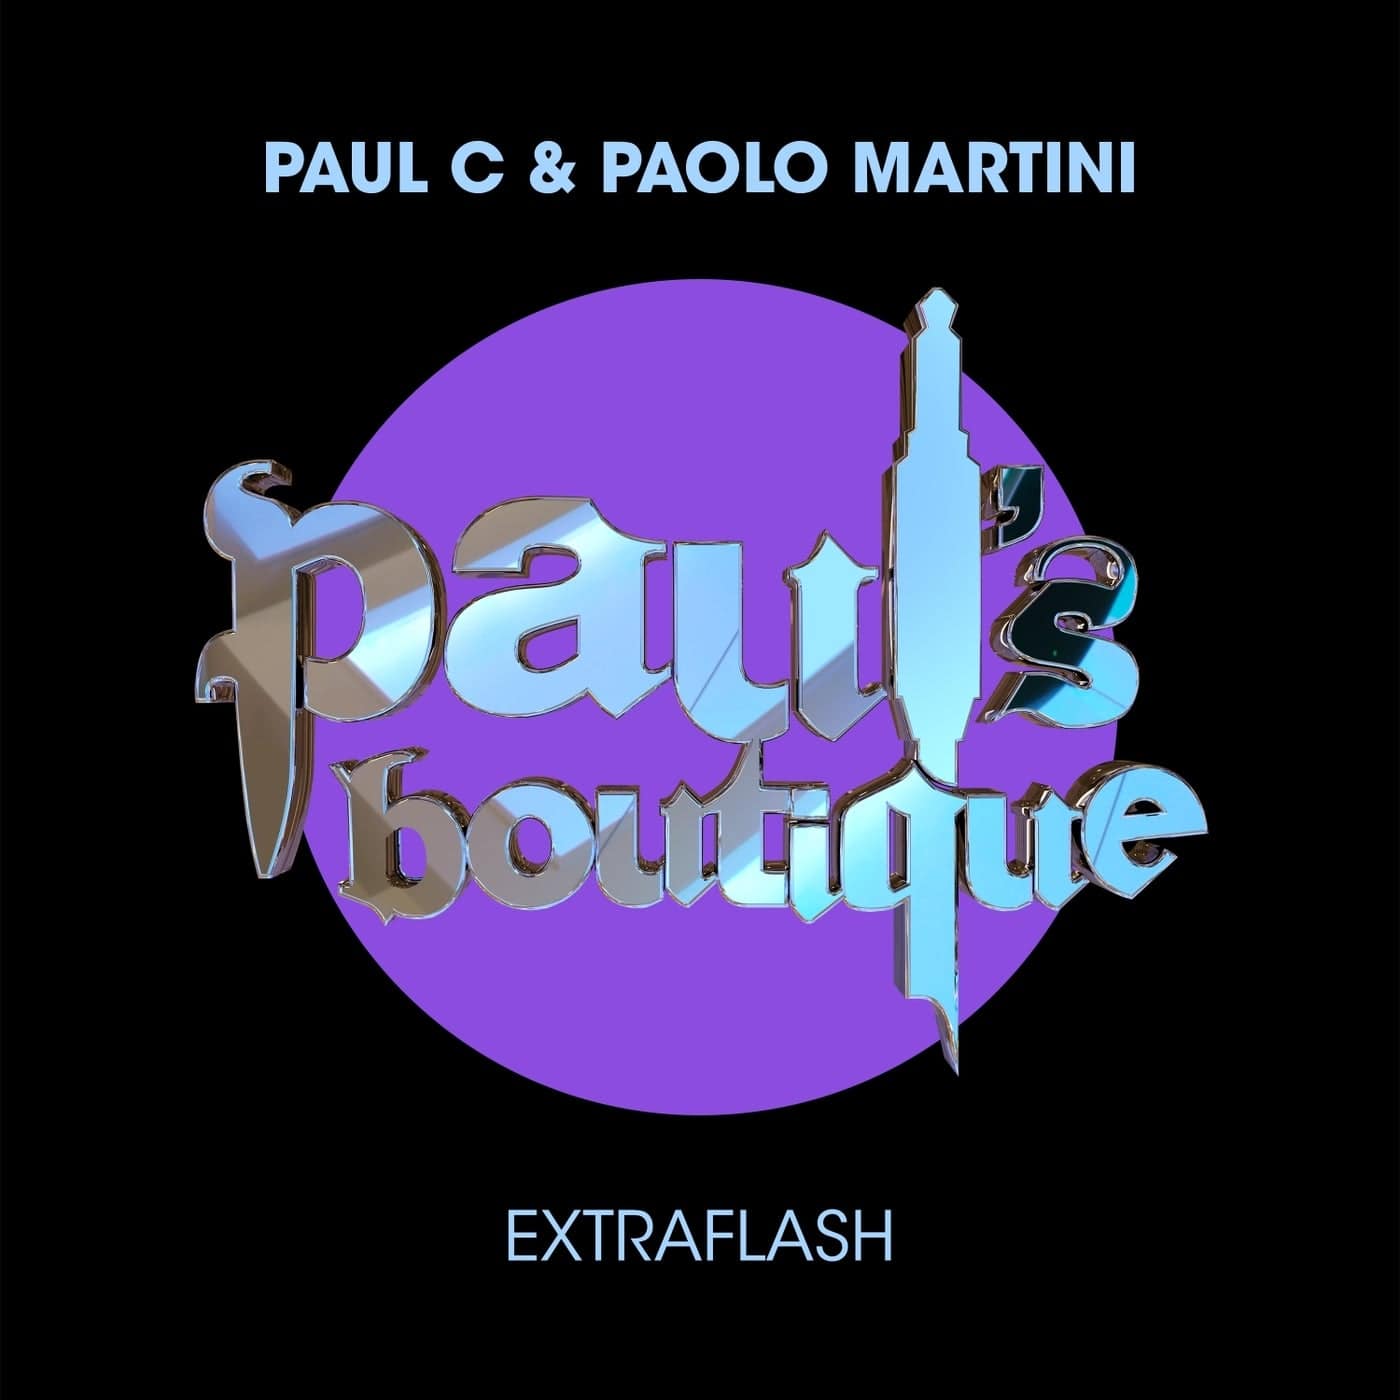 Release Cover: Paul C & Paolo Martini - Extraflash on Electrobuzz